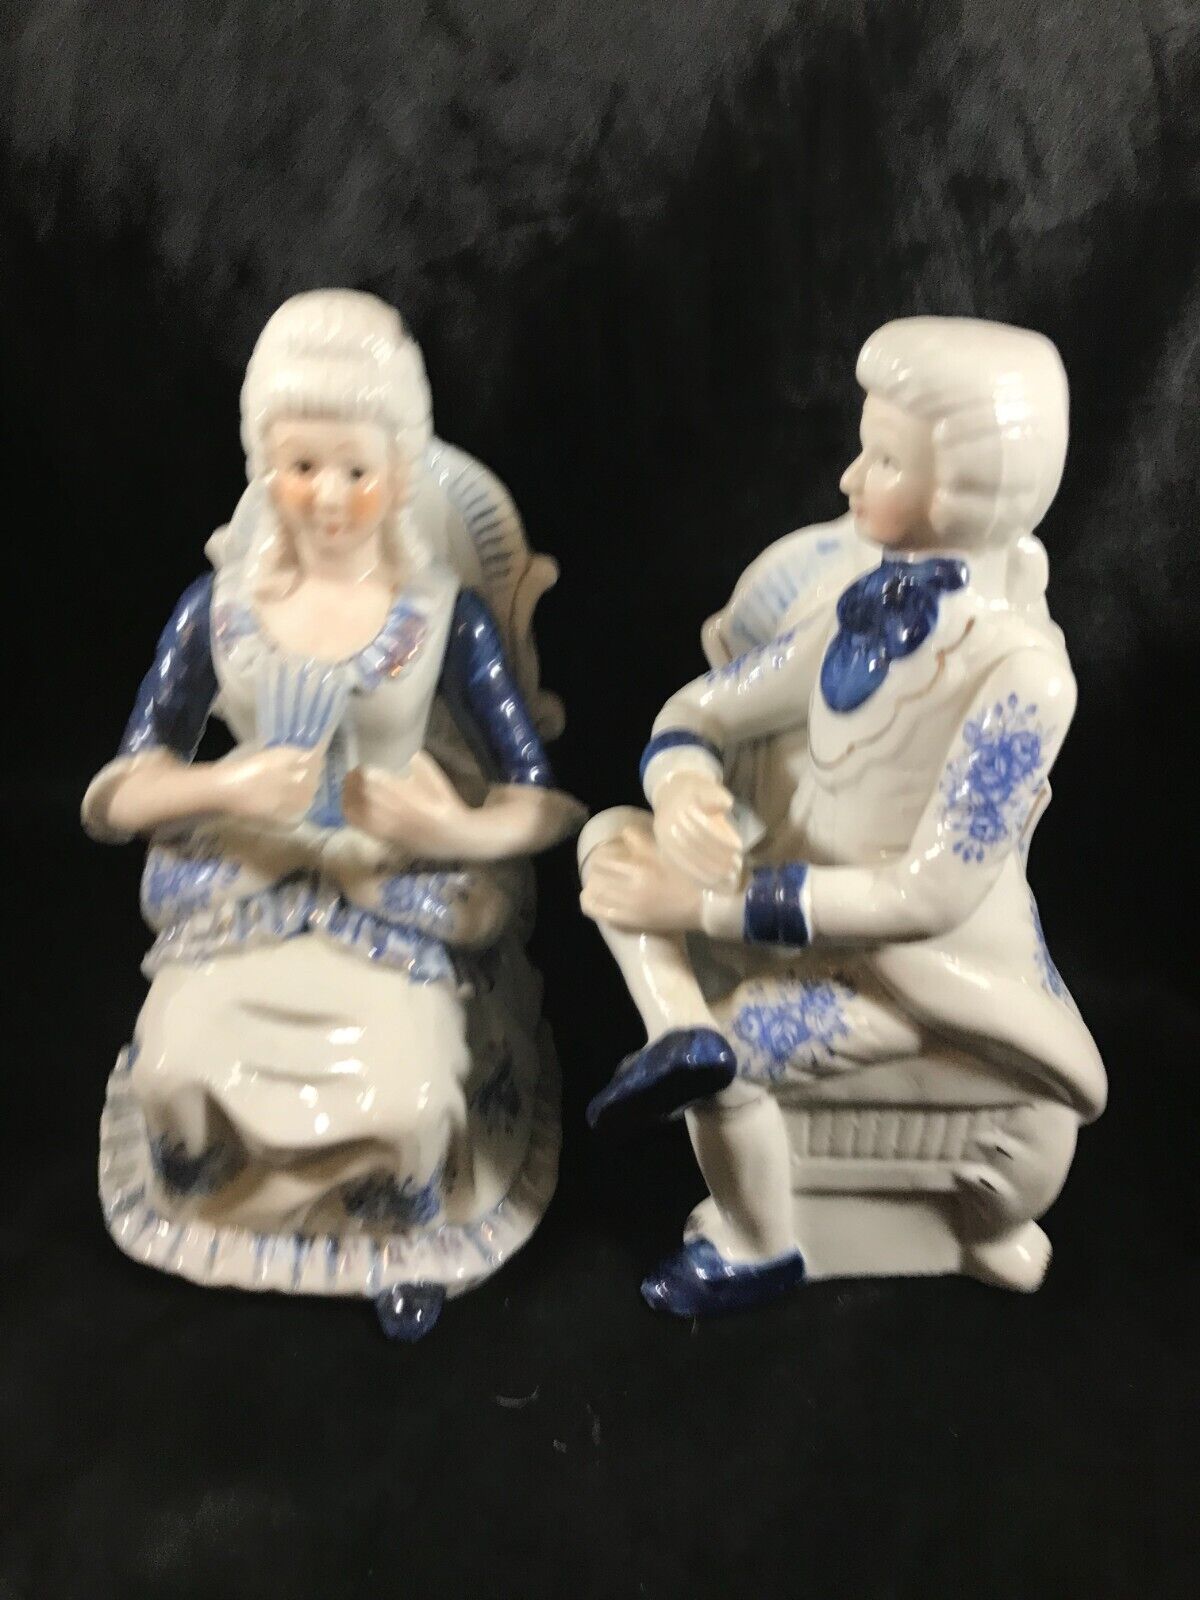 Pair of Vintage Porcelain George and Martha Seated Figurines Blue Floral